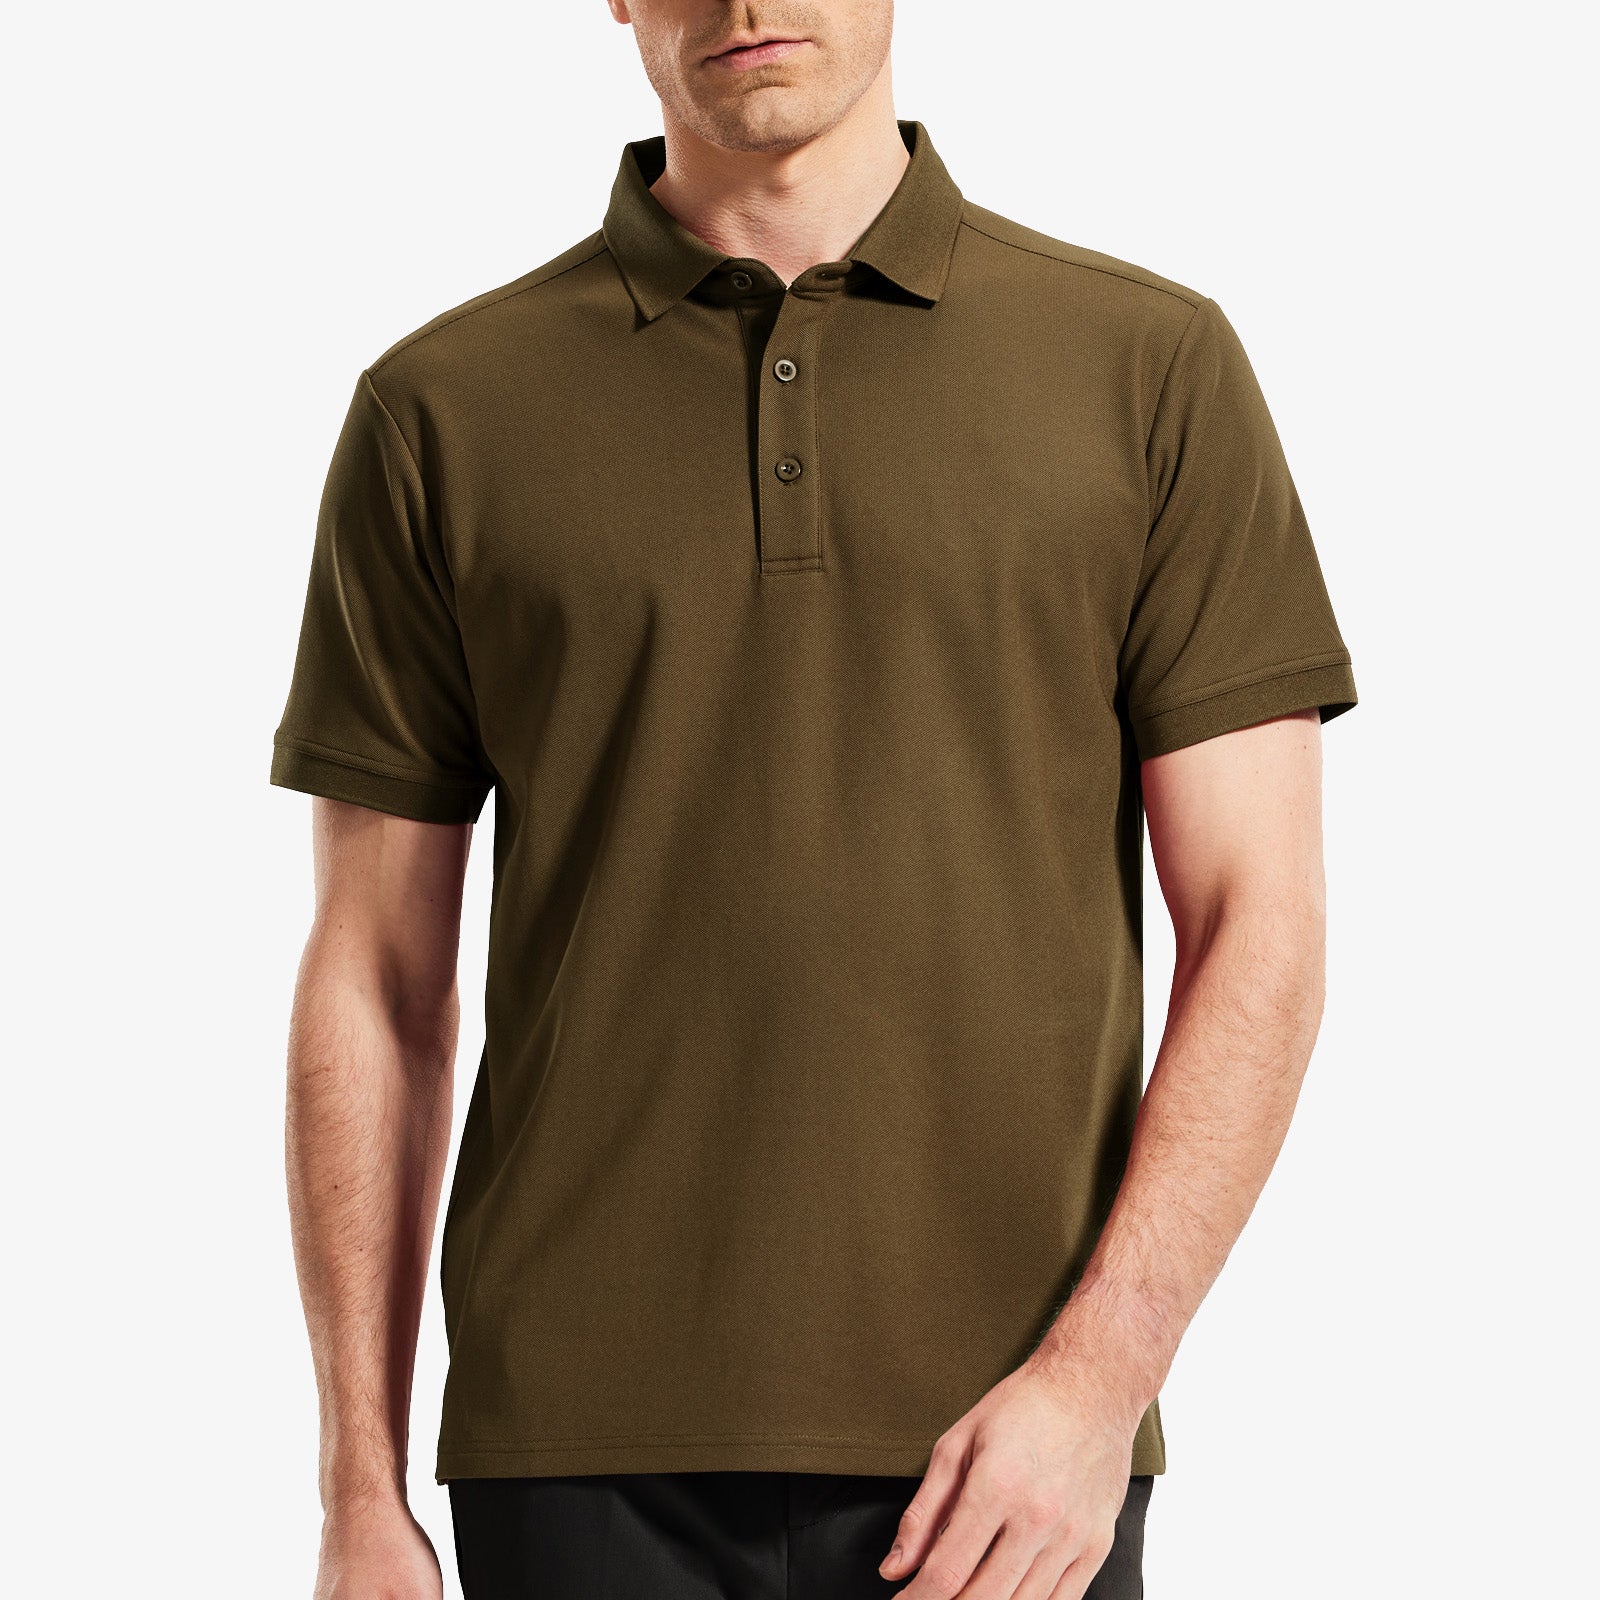 Men's Golf Polo Shirts Regular-fit Casual Collared T-Shirts